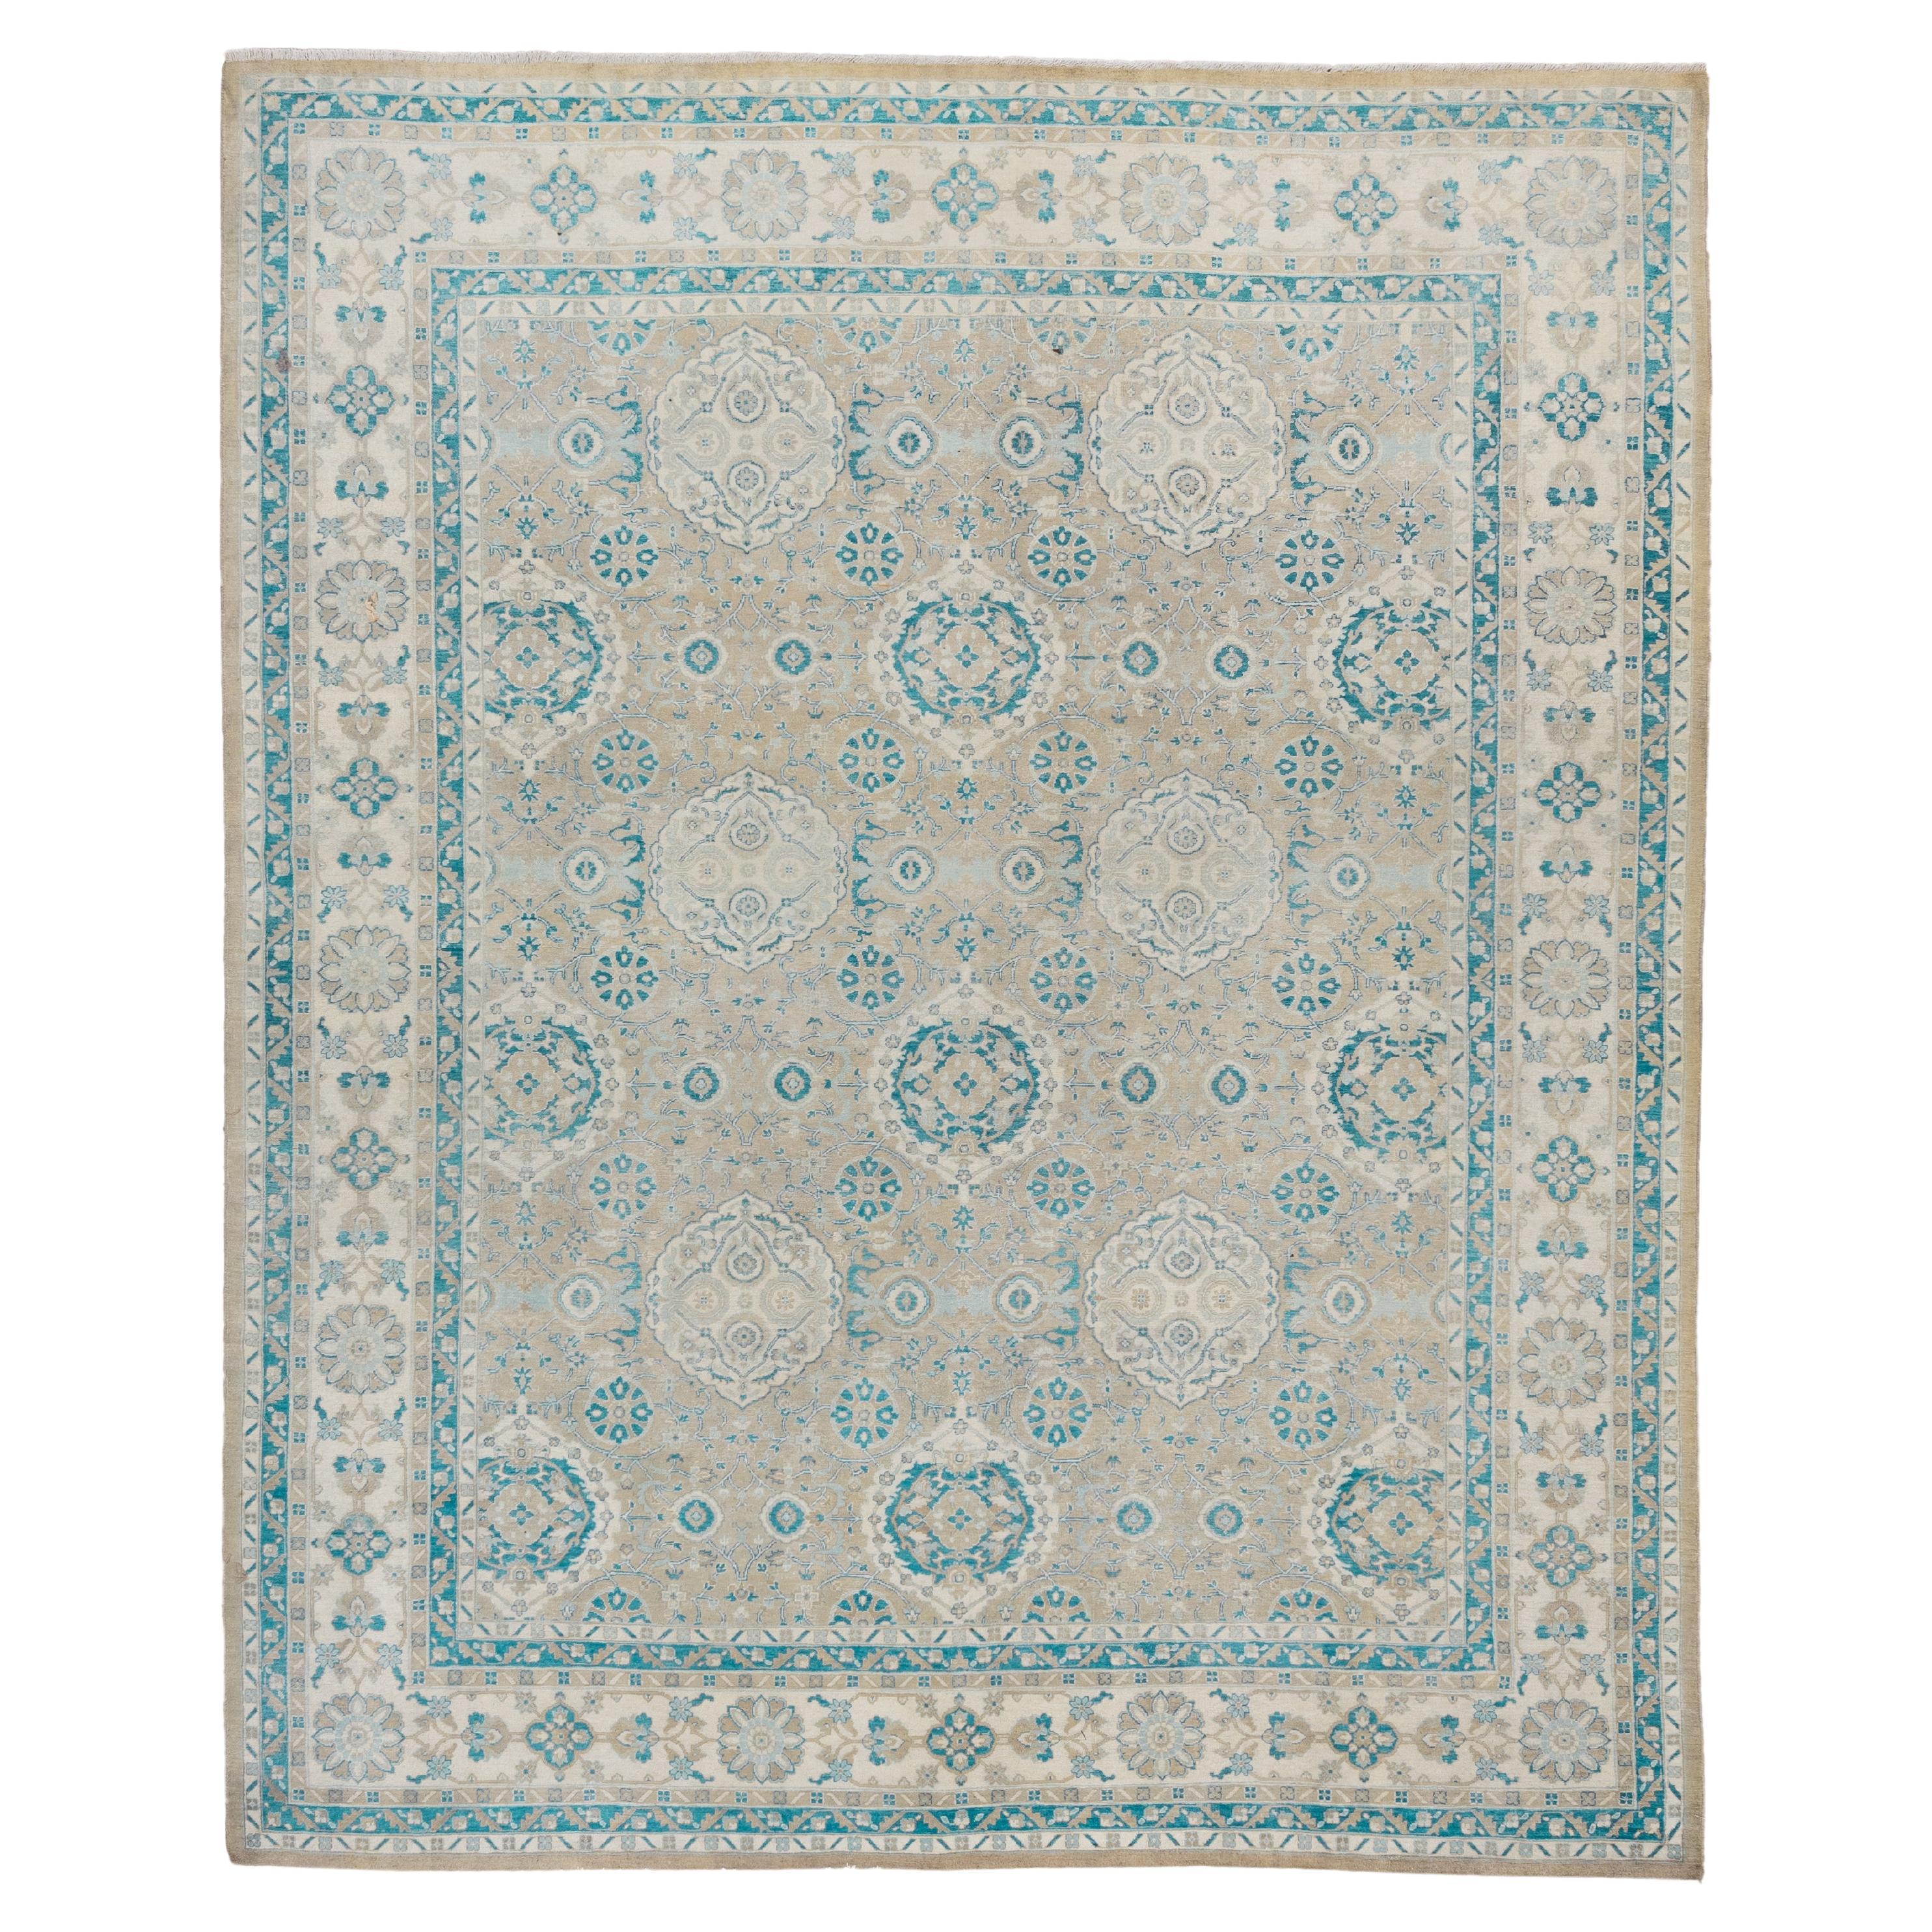 Handknotted Sivas Design Area Rug, Allover Beige Field, Ivory Borders For Sale